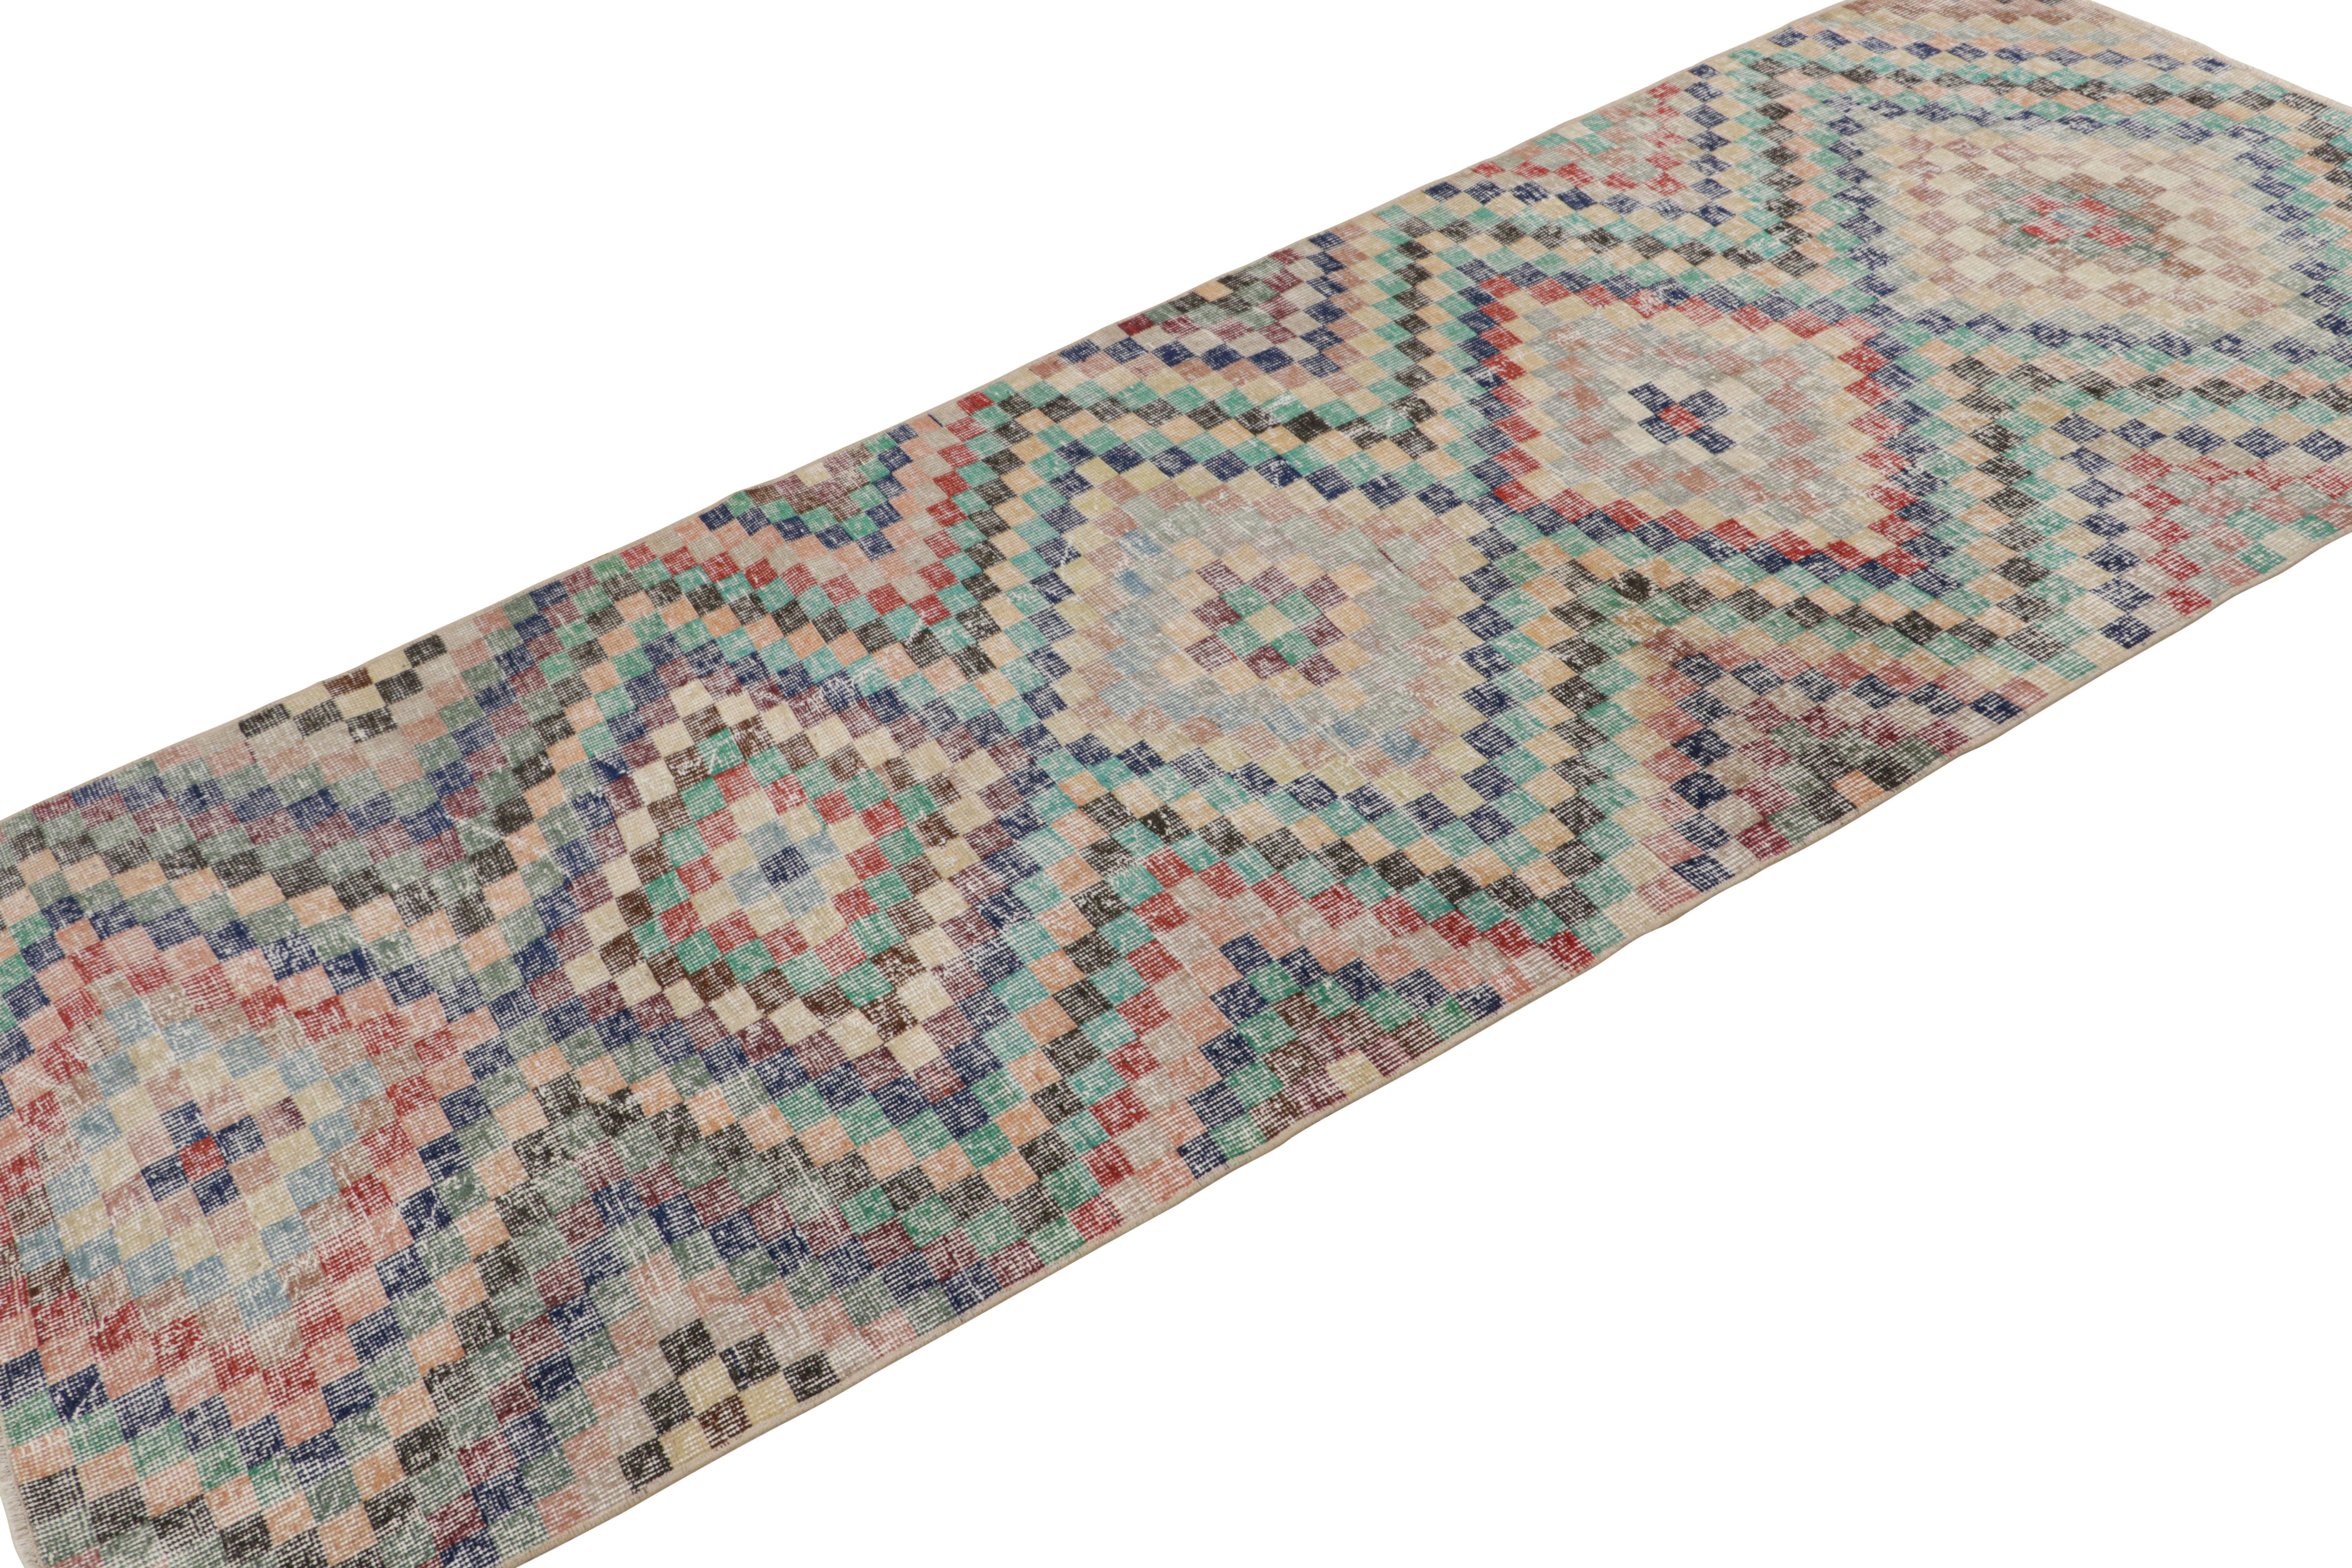 This vintage Zeki Müren 3x9 runner rug, hand-knotted in wool, circa 1960-1970, is inspired by Turkish Kilim sensibilities in its drawing and scale adapted to a more colorful mid-century interpretation. 

On the Design: 

Connoisseurs will appreciate